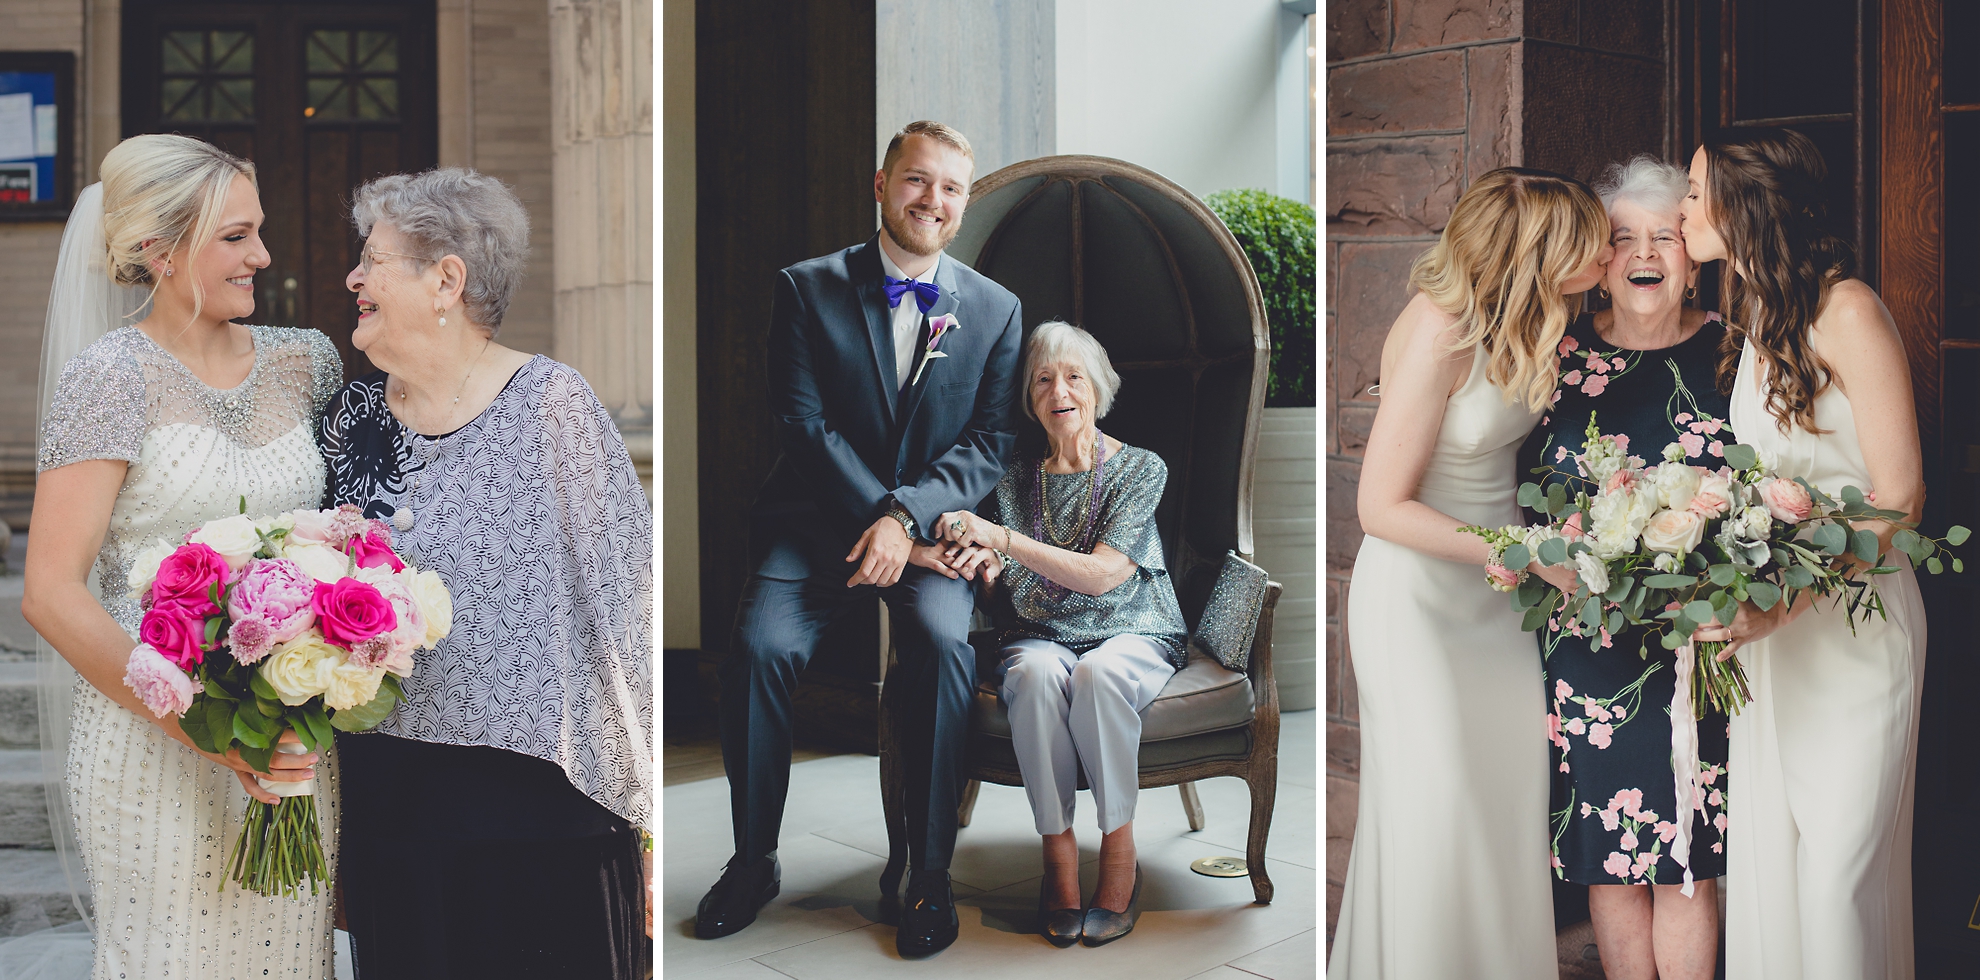 Brides and groom pose with grandmas for portraits at weddings in Buffalo, NY